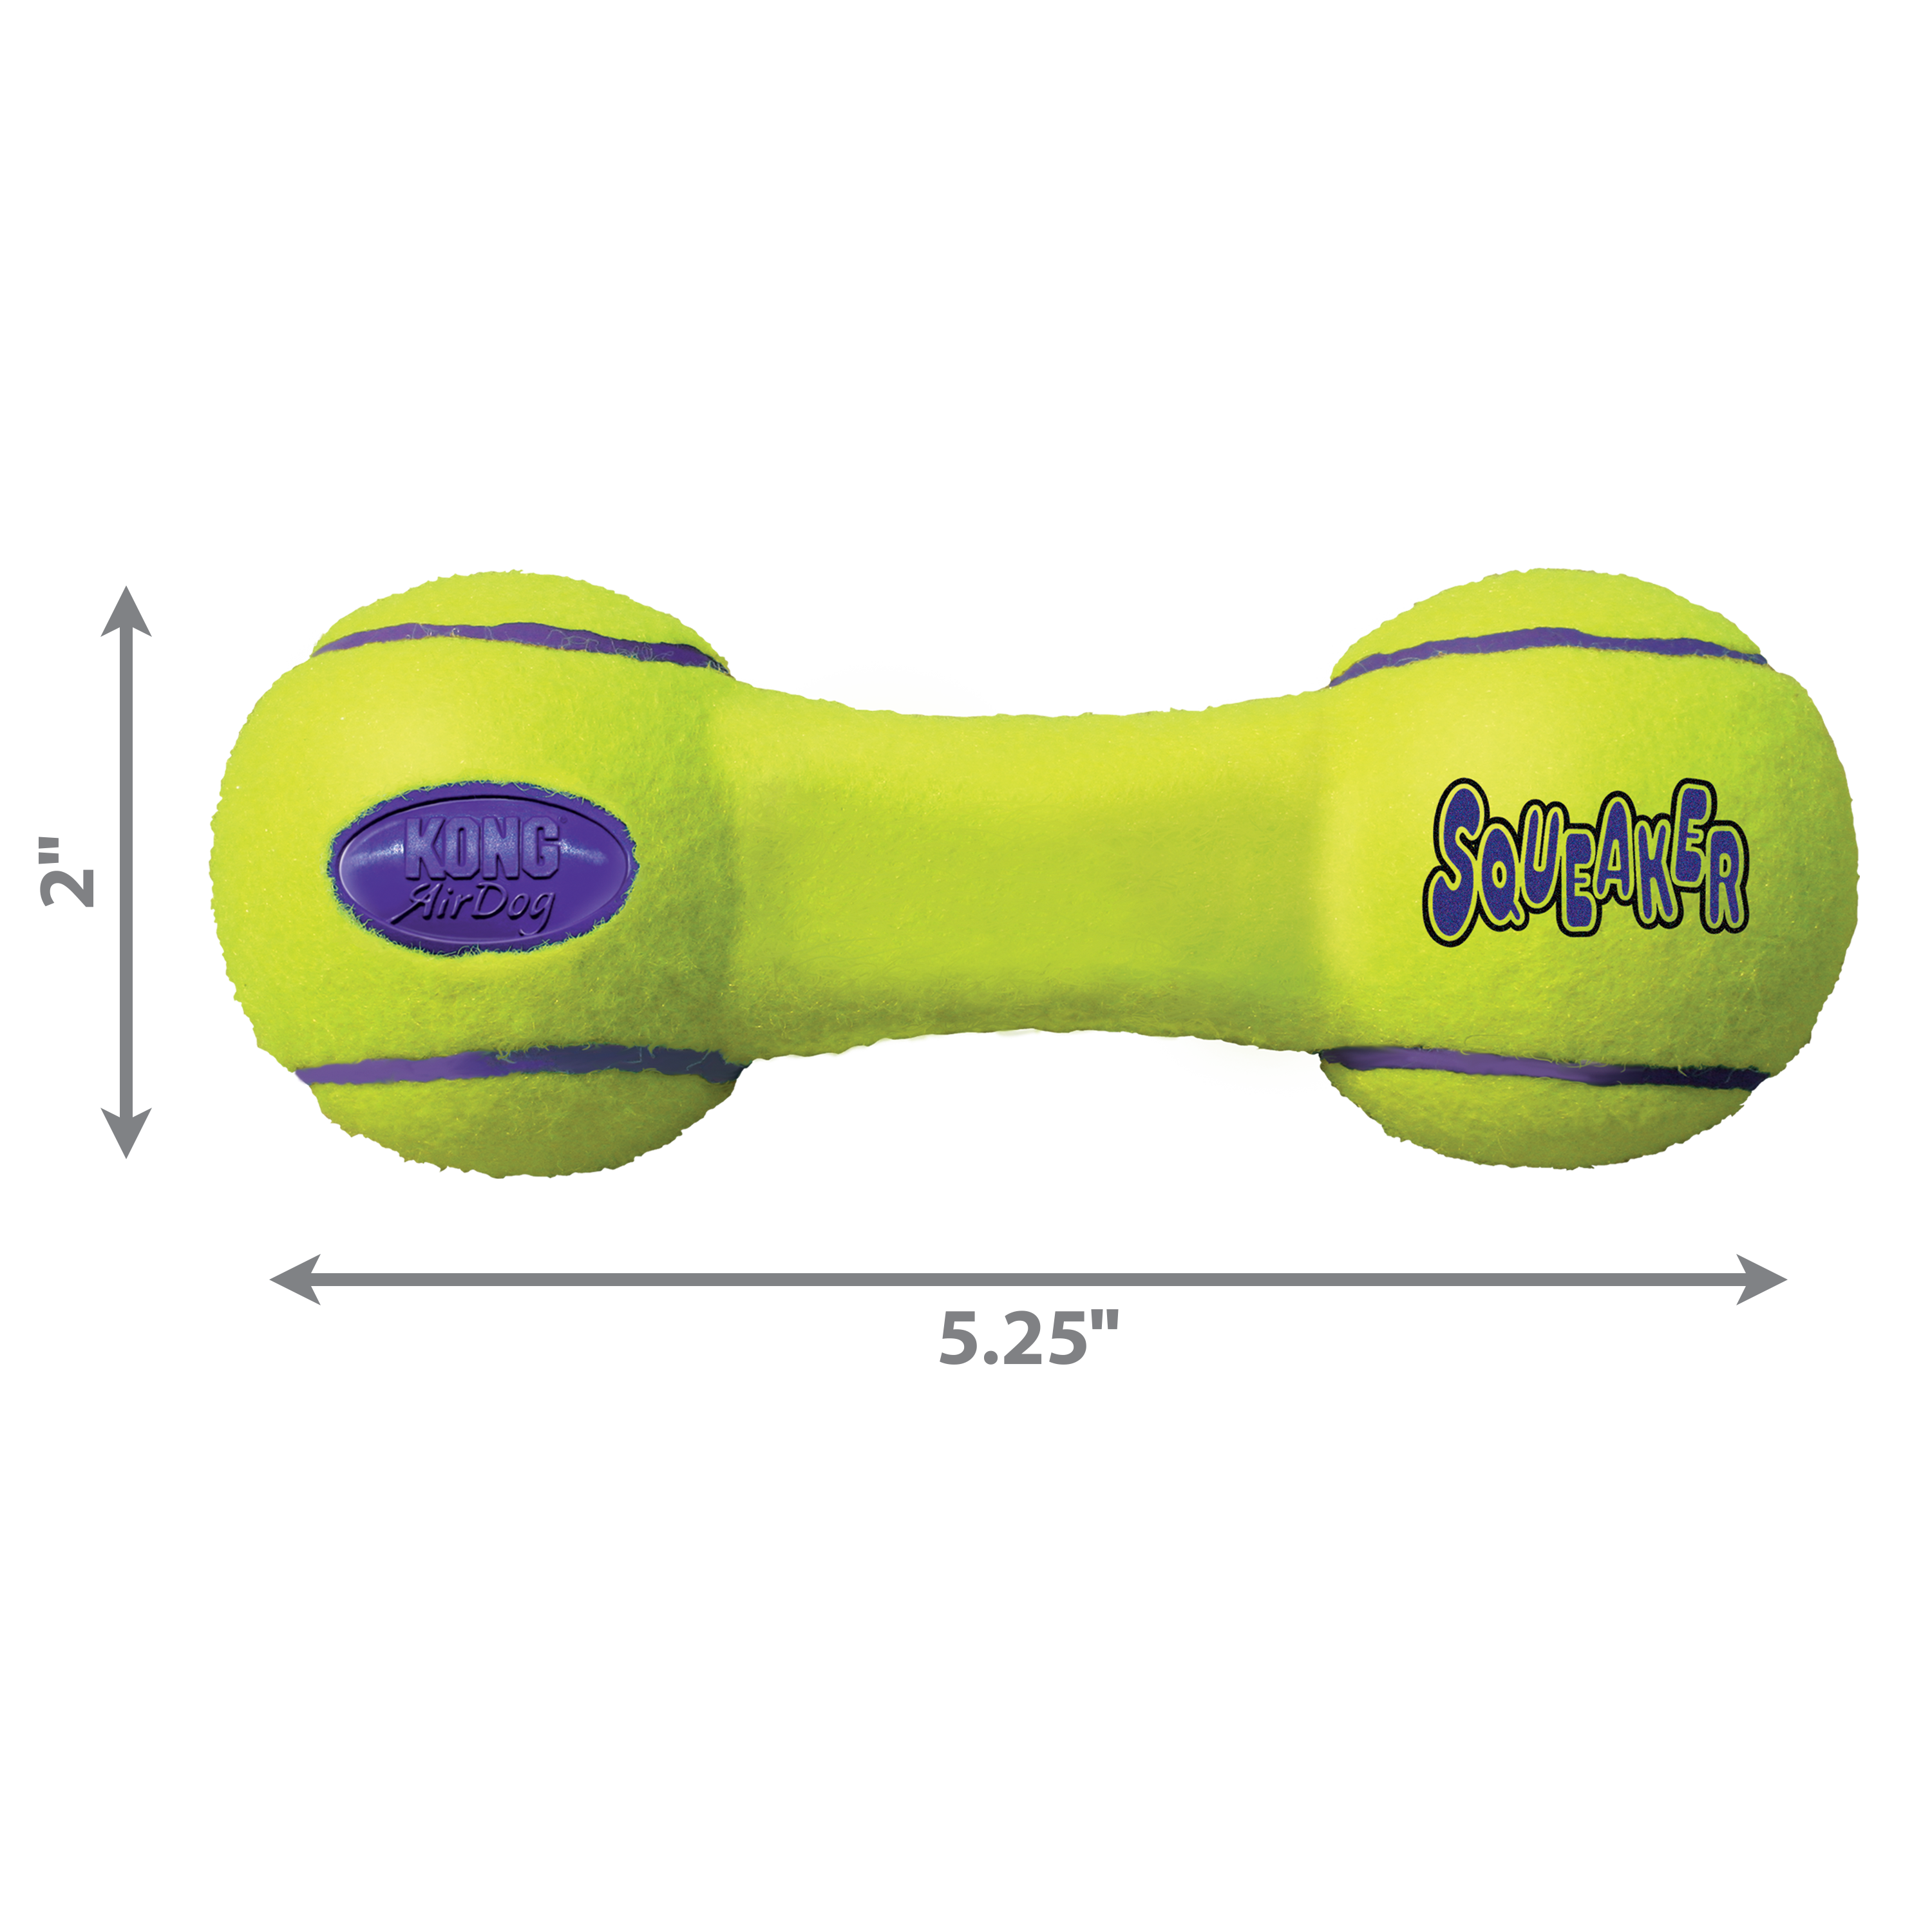 AirDog Squeaker Dumbbell dimoffpack product image